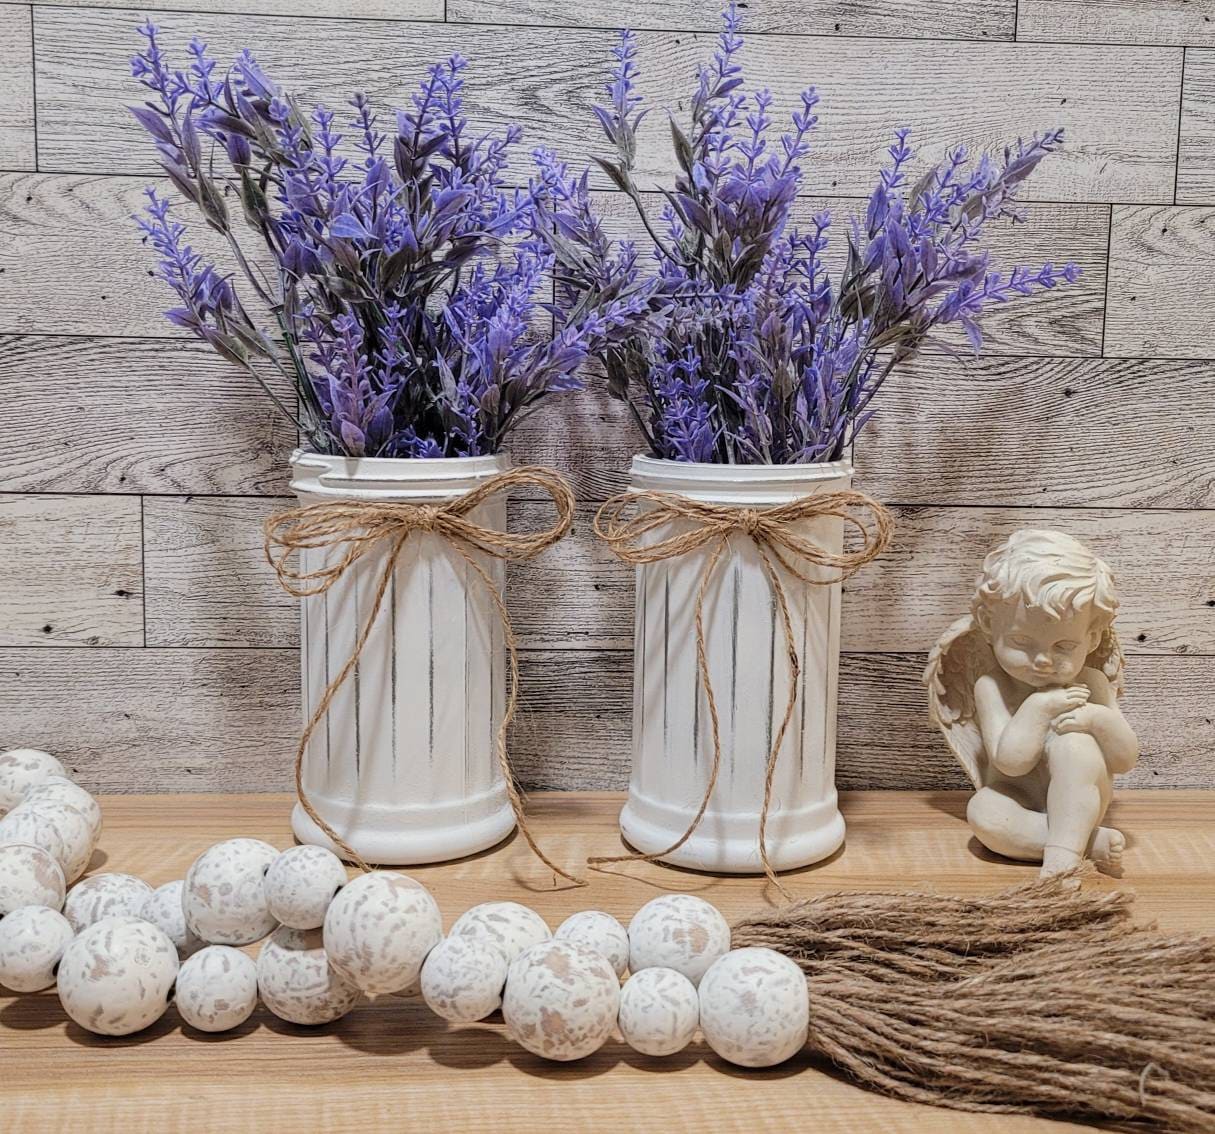  Omldggr Artificial Lavender Flower Plants in Metal Pots, 3 Pack Lavender  Decor Faux Lavender Plants Potted Home Decor for Farmhouse Table  Centerpiece Windowsill Country Indoor Outdoor Decoration : Home & Kitchen